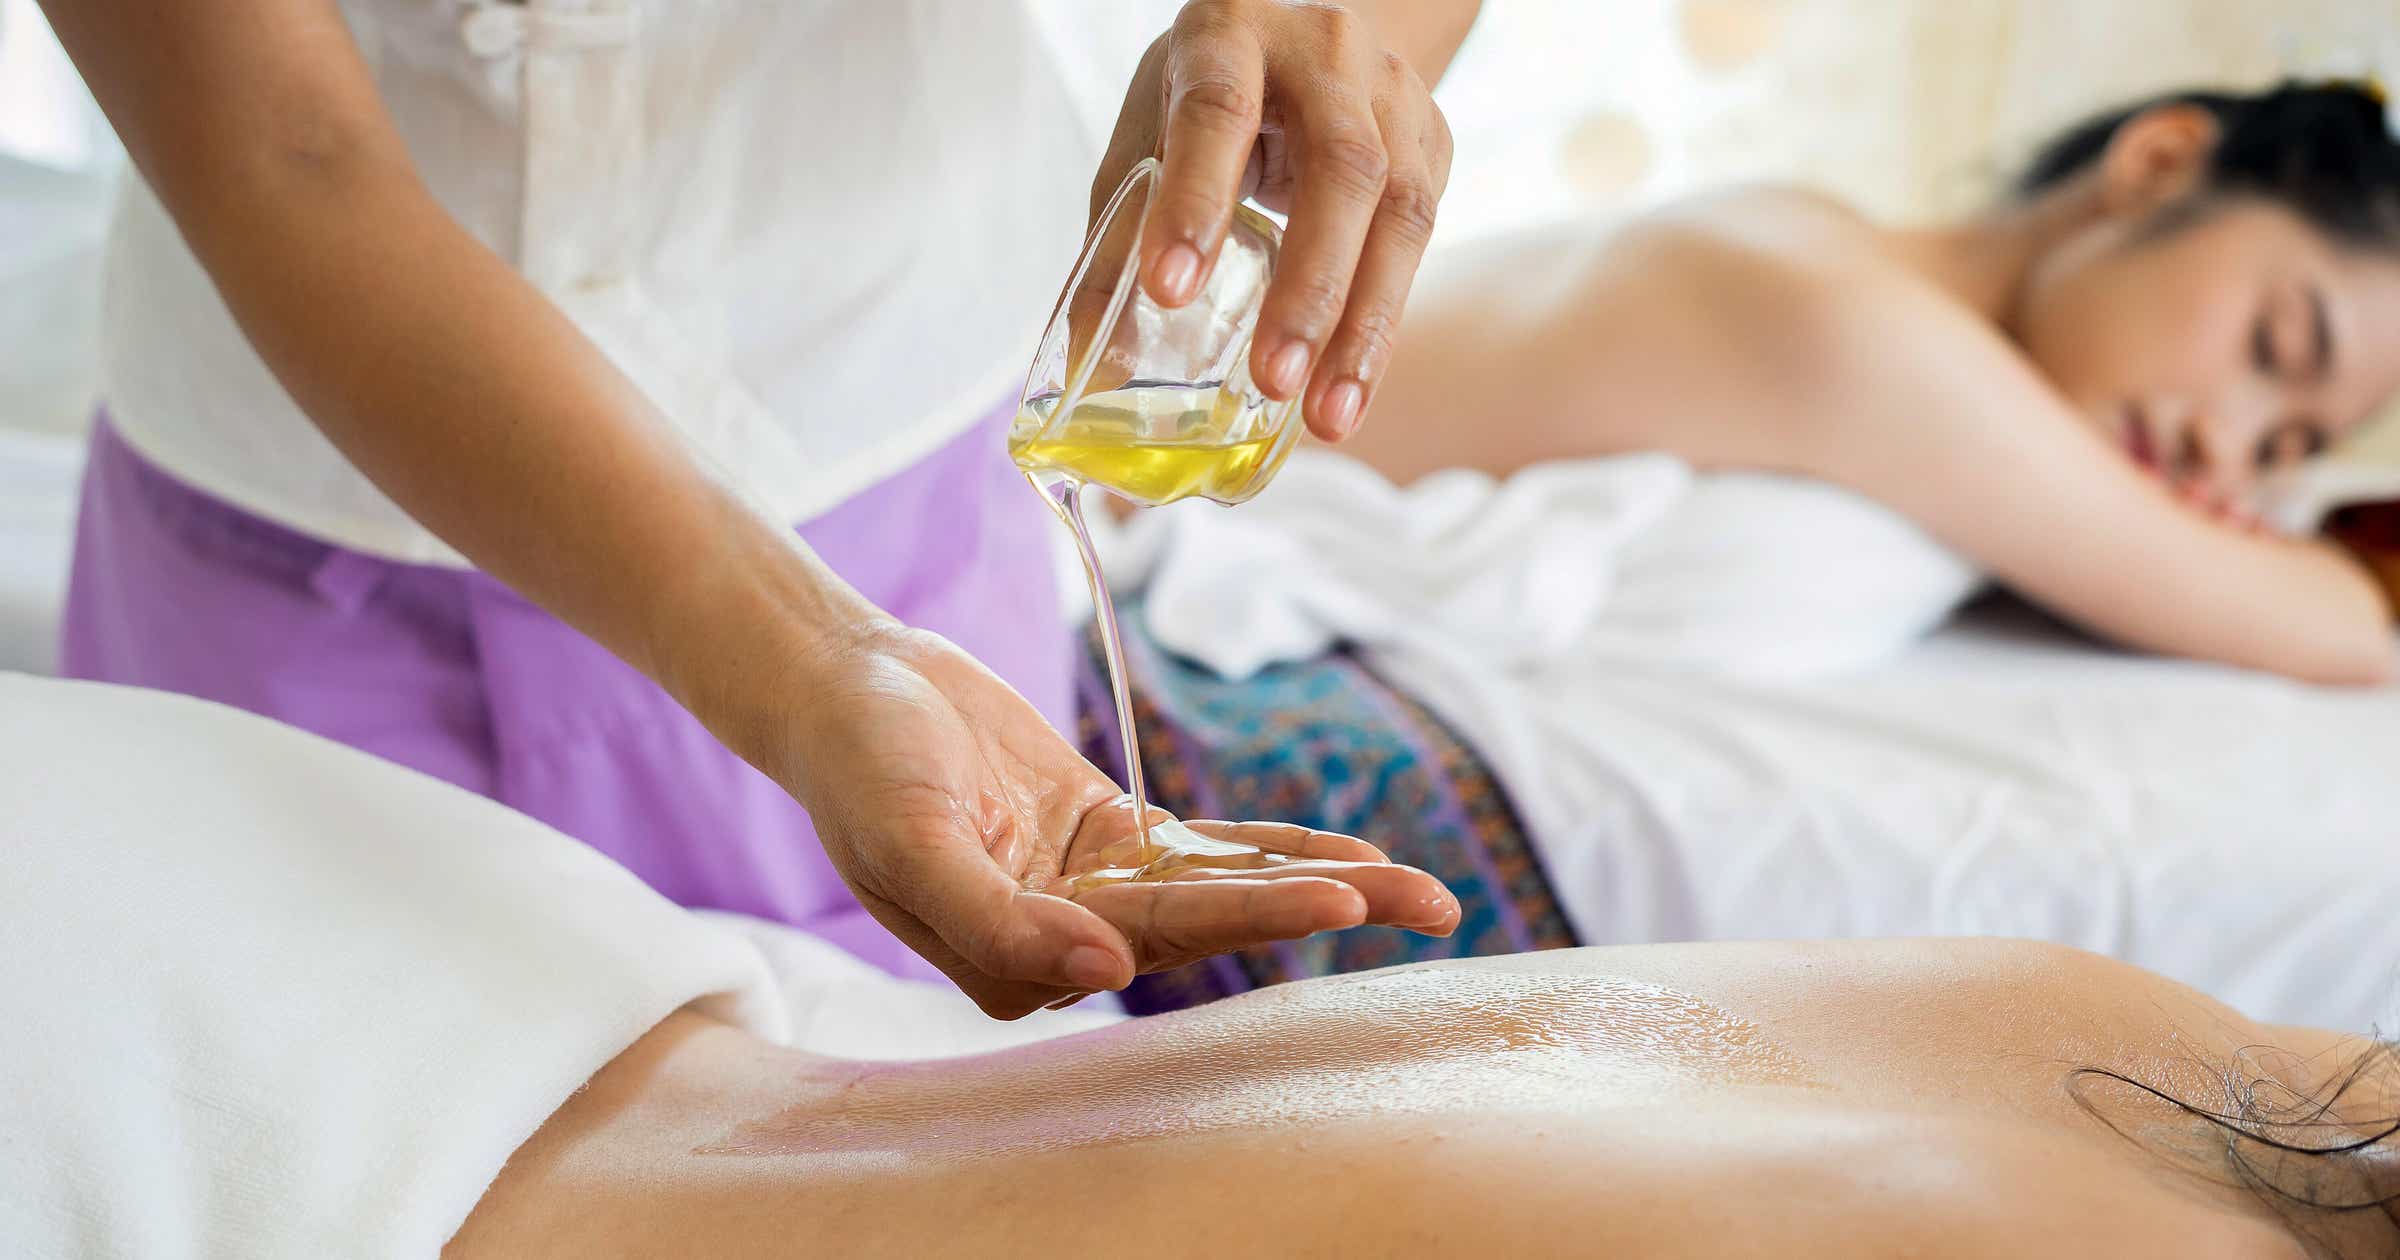 Enjoy the Benefits of Professional Massage and Relaxation Services While Away on Business Trips